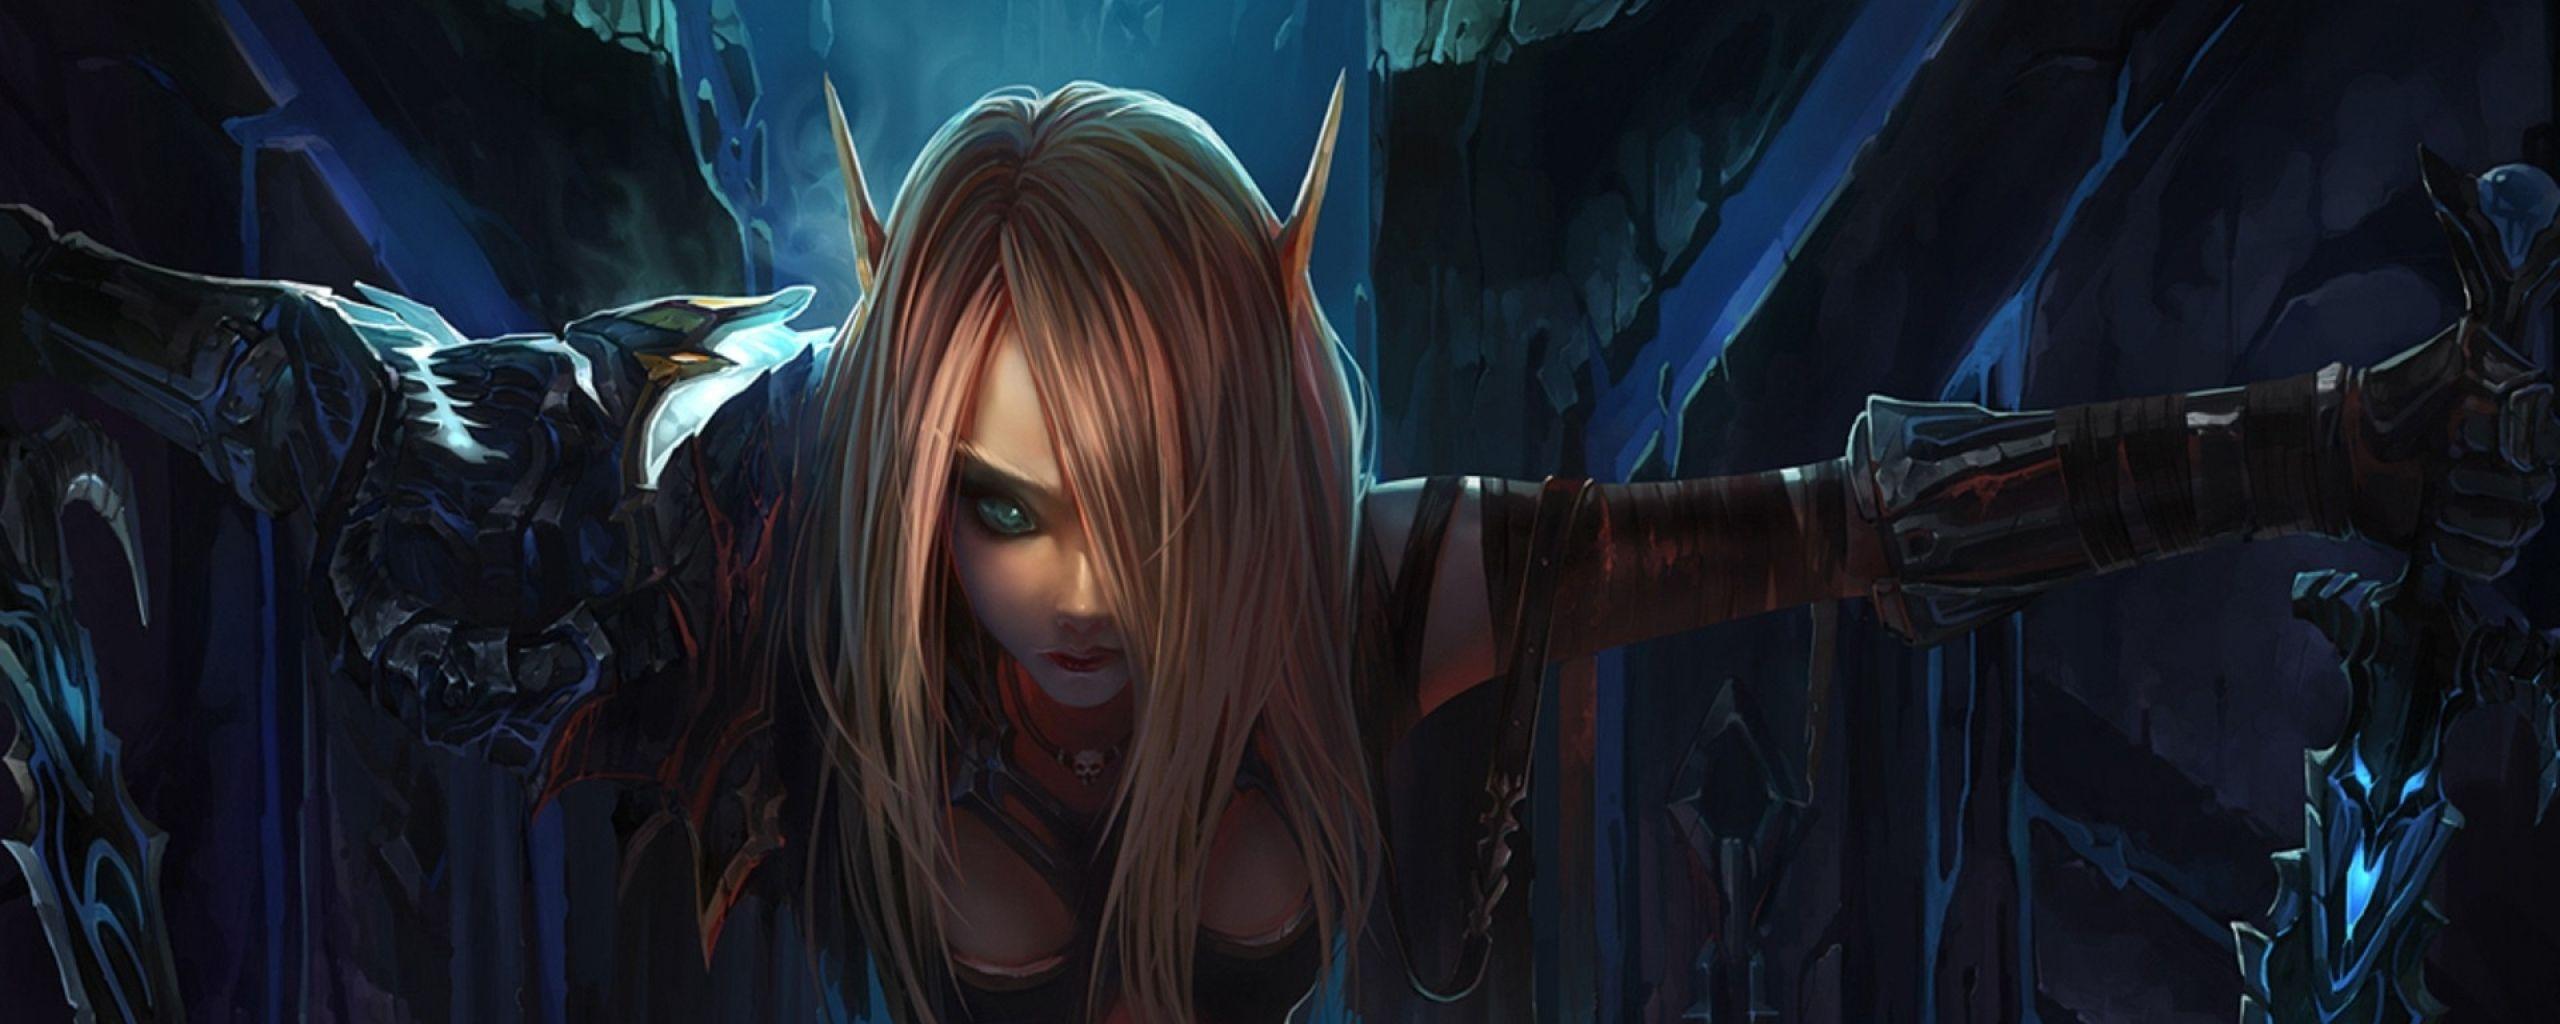 World of Warcraft Dual Monitor Wallpapers - Top Free World of Warcraft